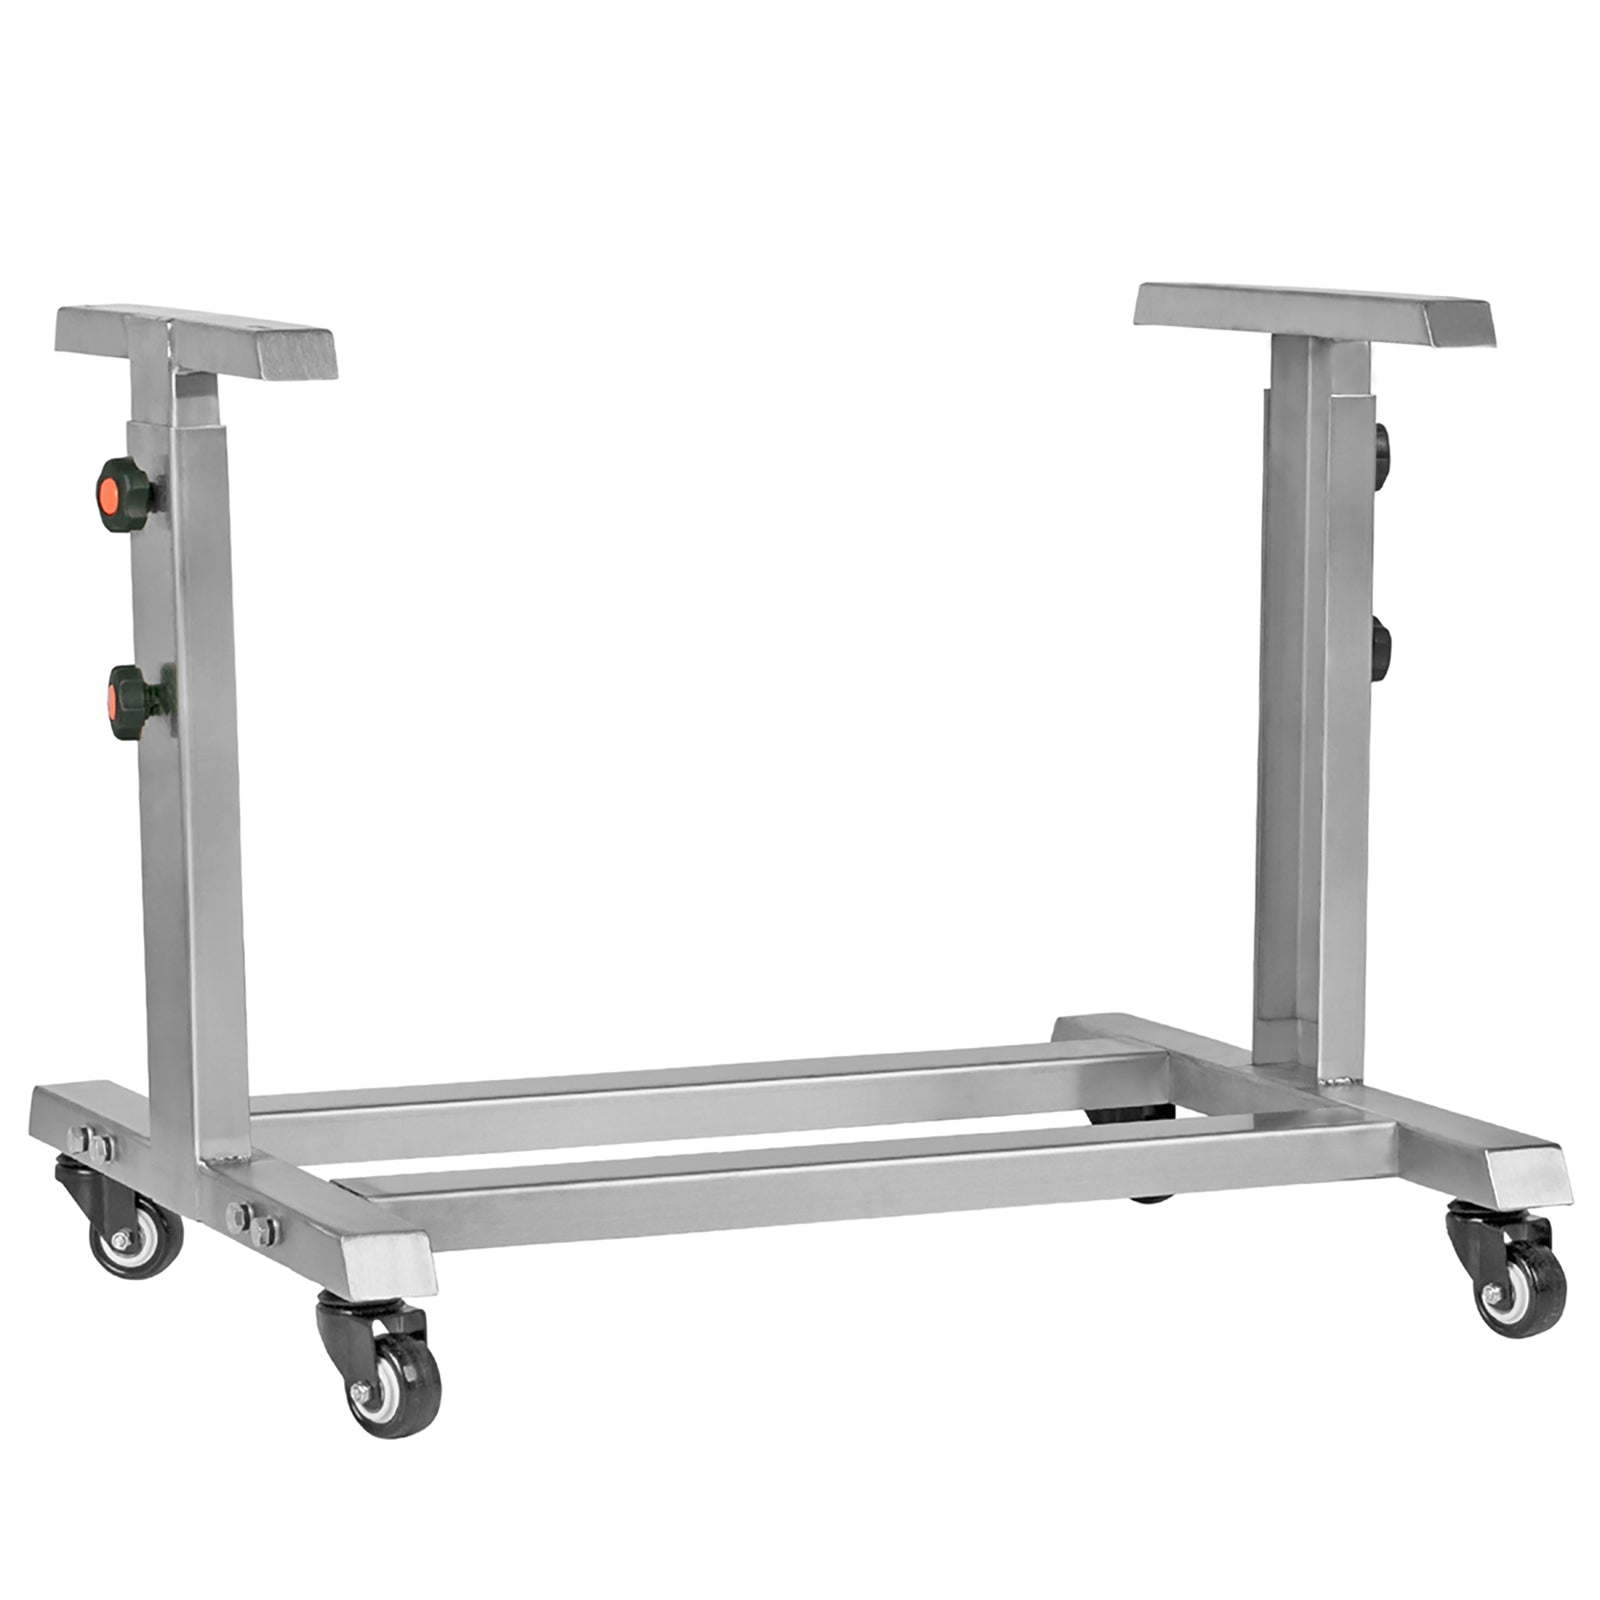 The stainless steel JORES TECHNOLOGIES® base stand with wheels compatible with the CBS-800I